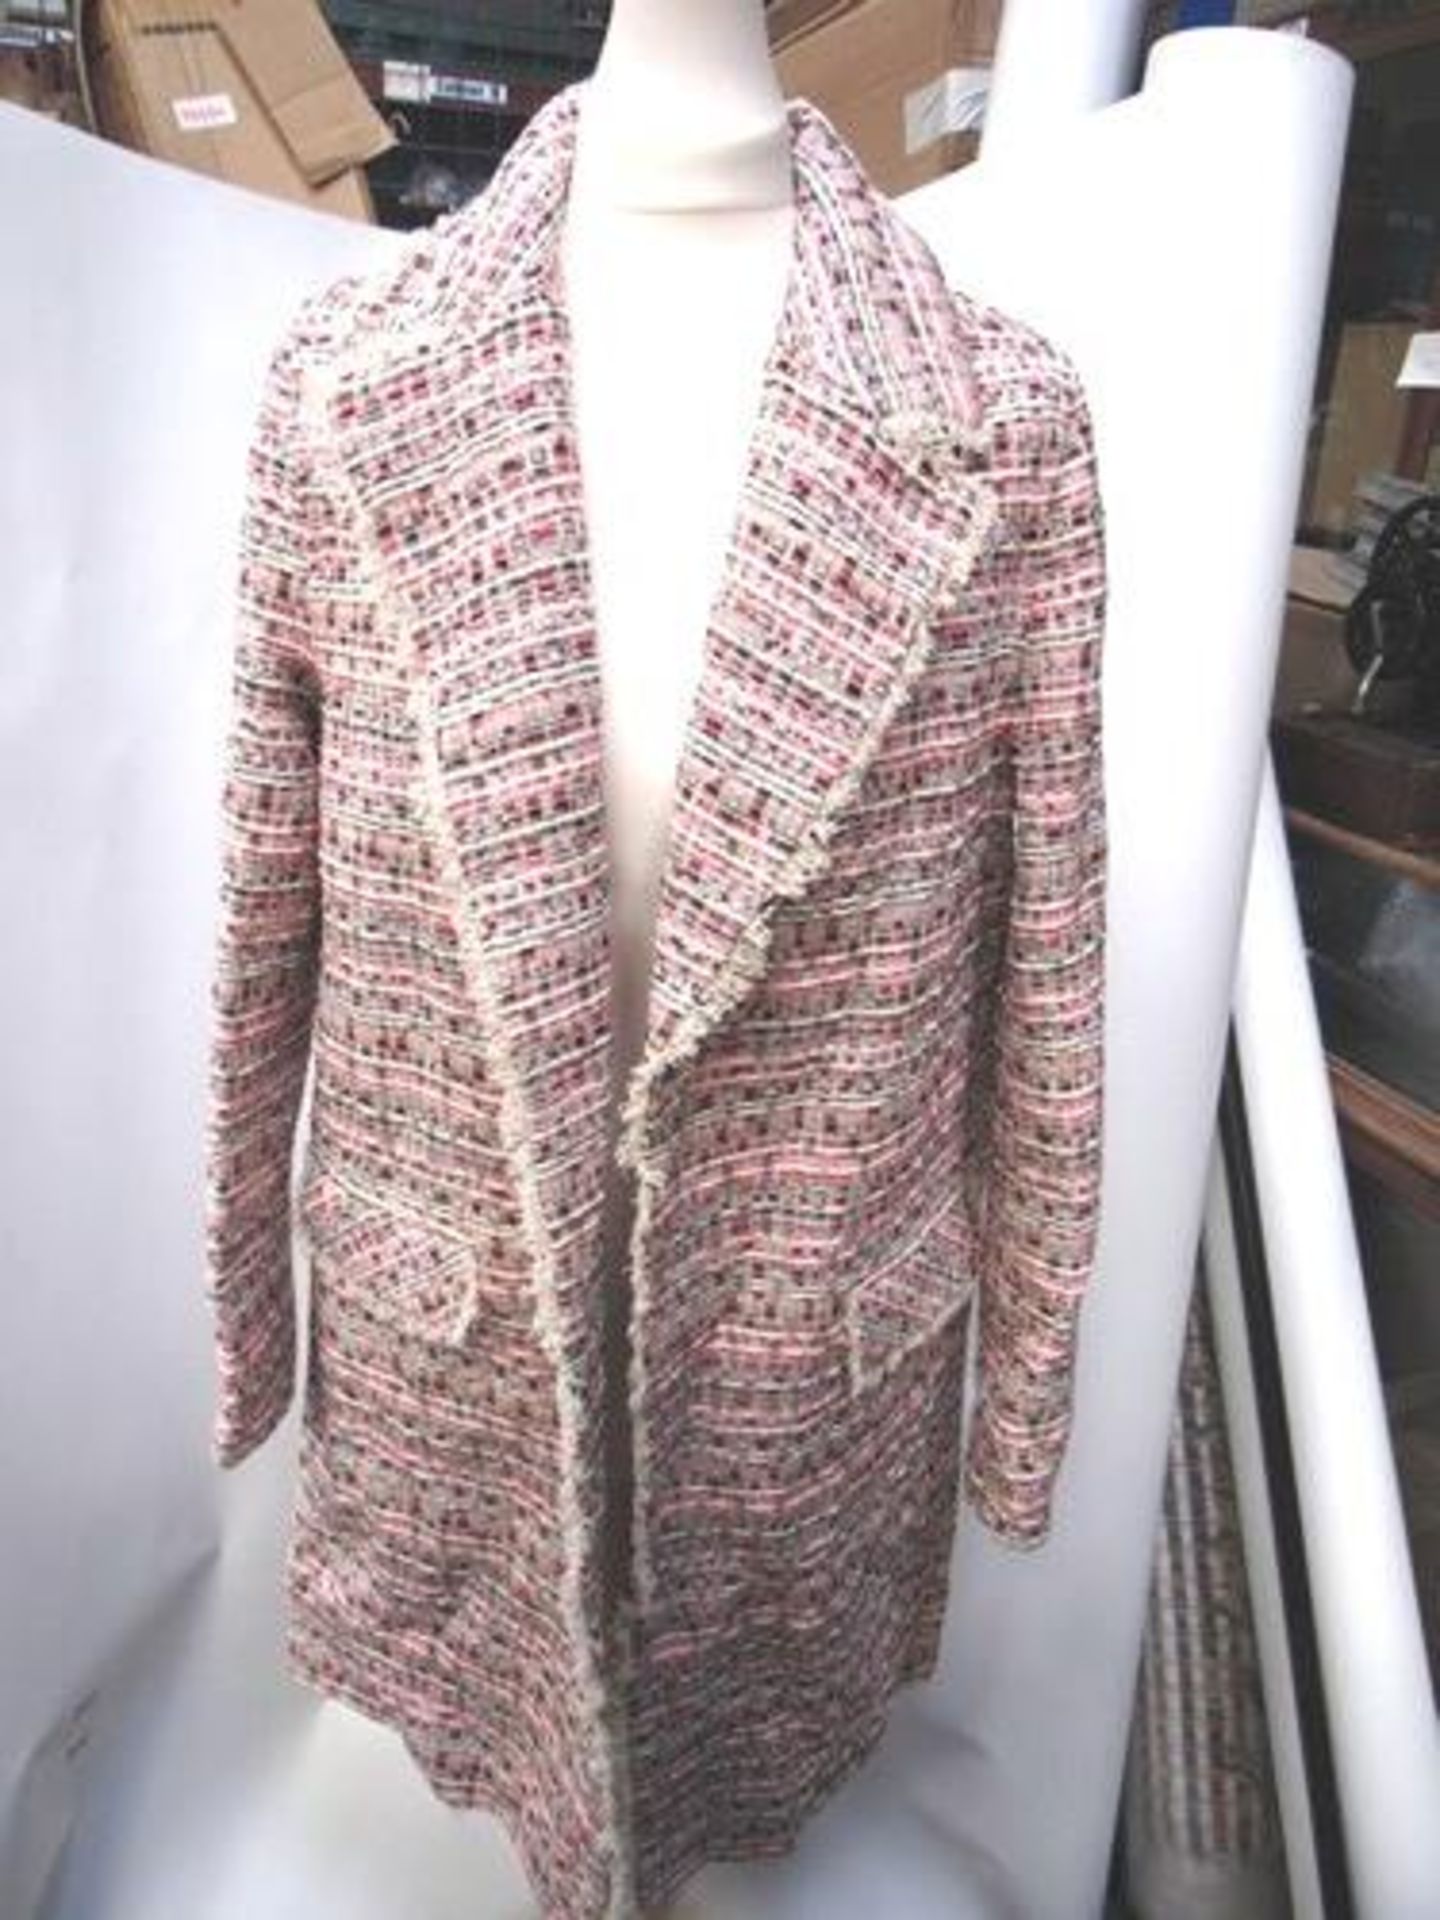 1 x Helene Berman Bright Twee coats, pink/rose, size S, RRP £180.00 - New (clothing table)